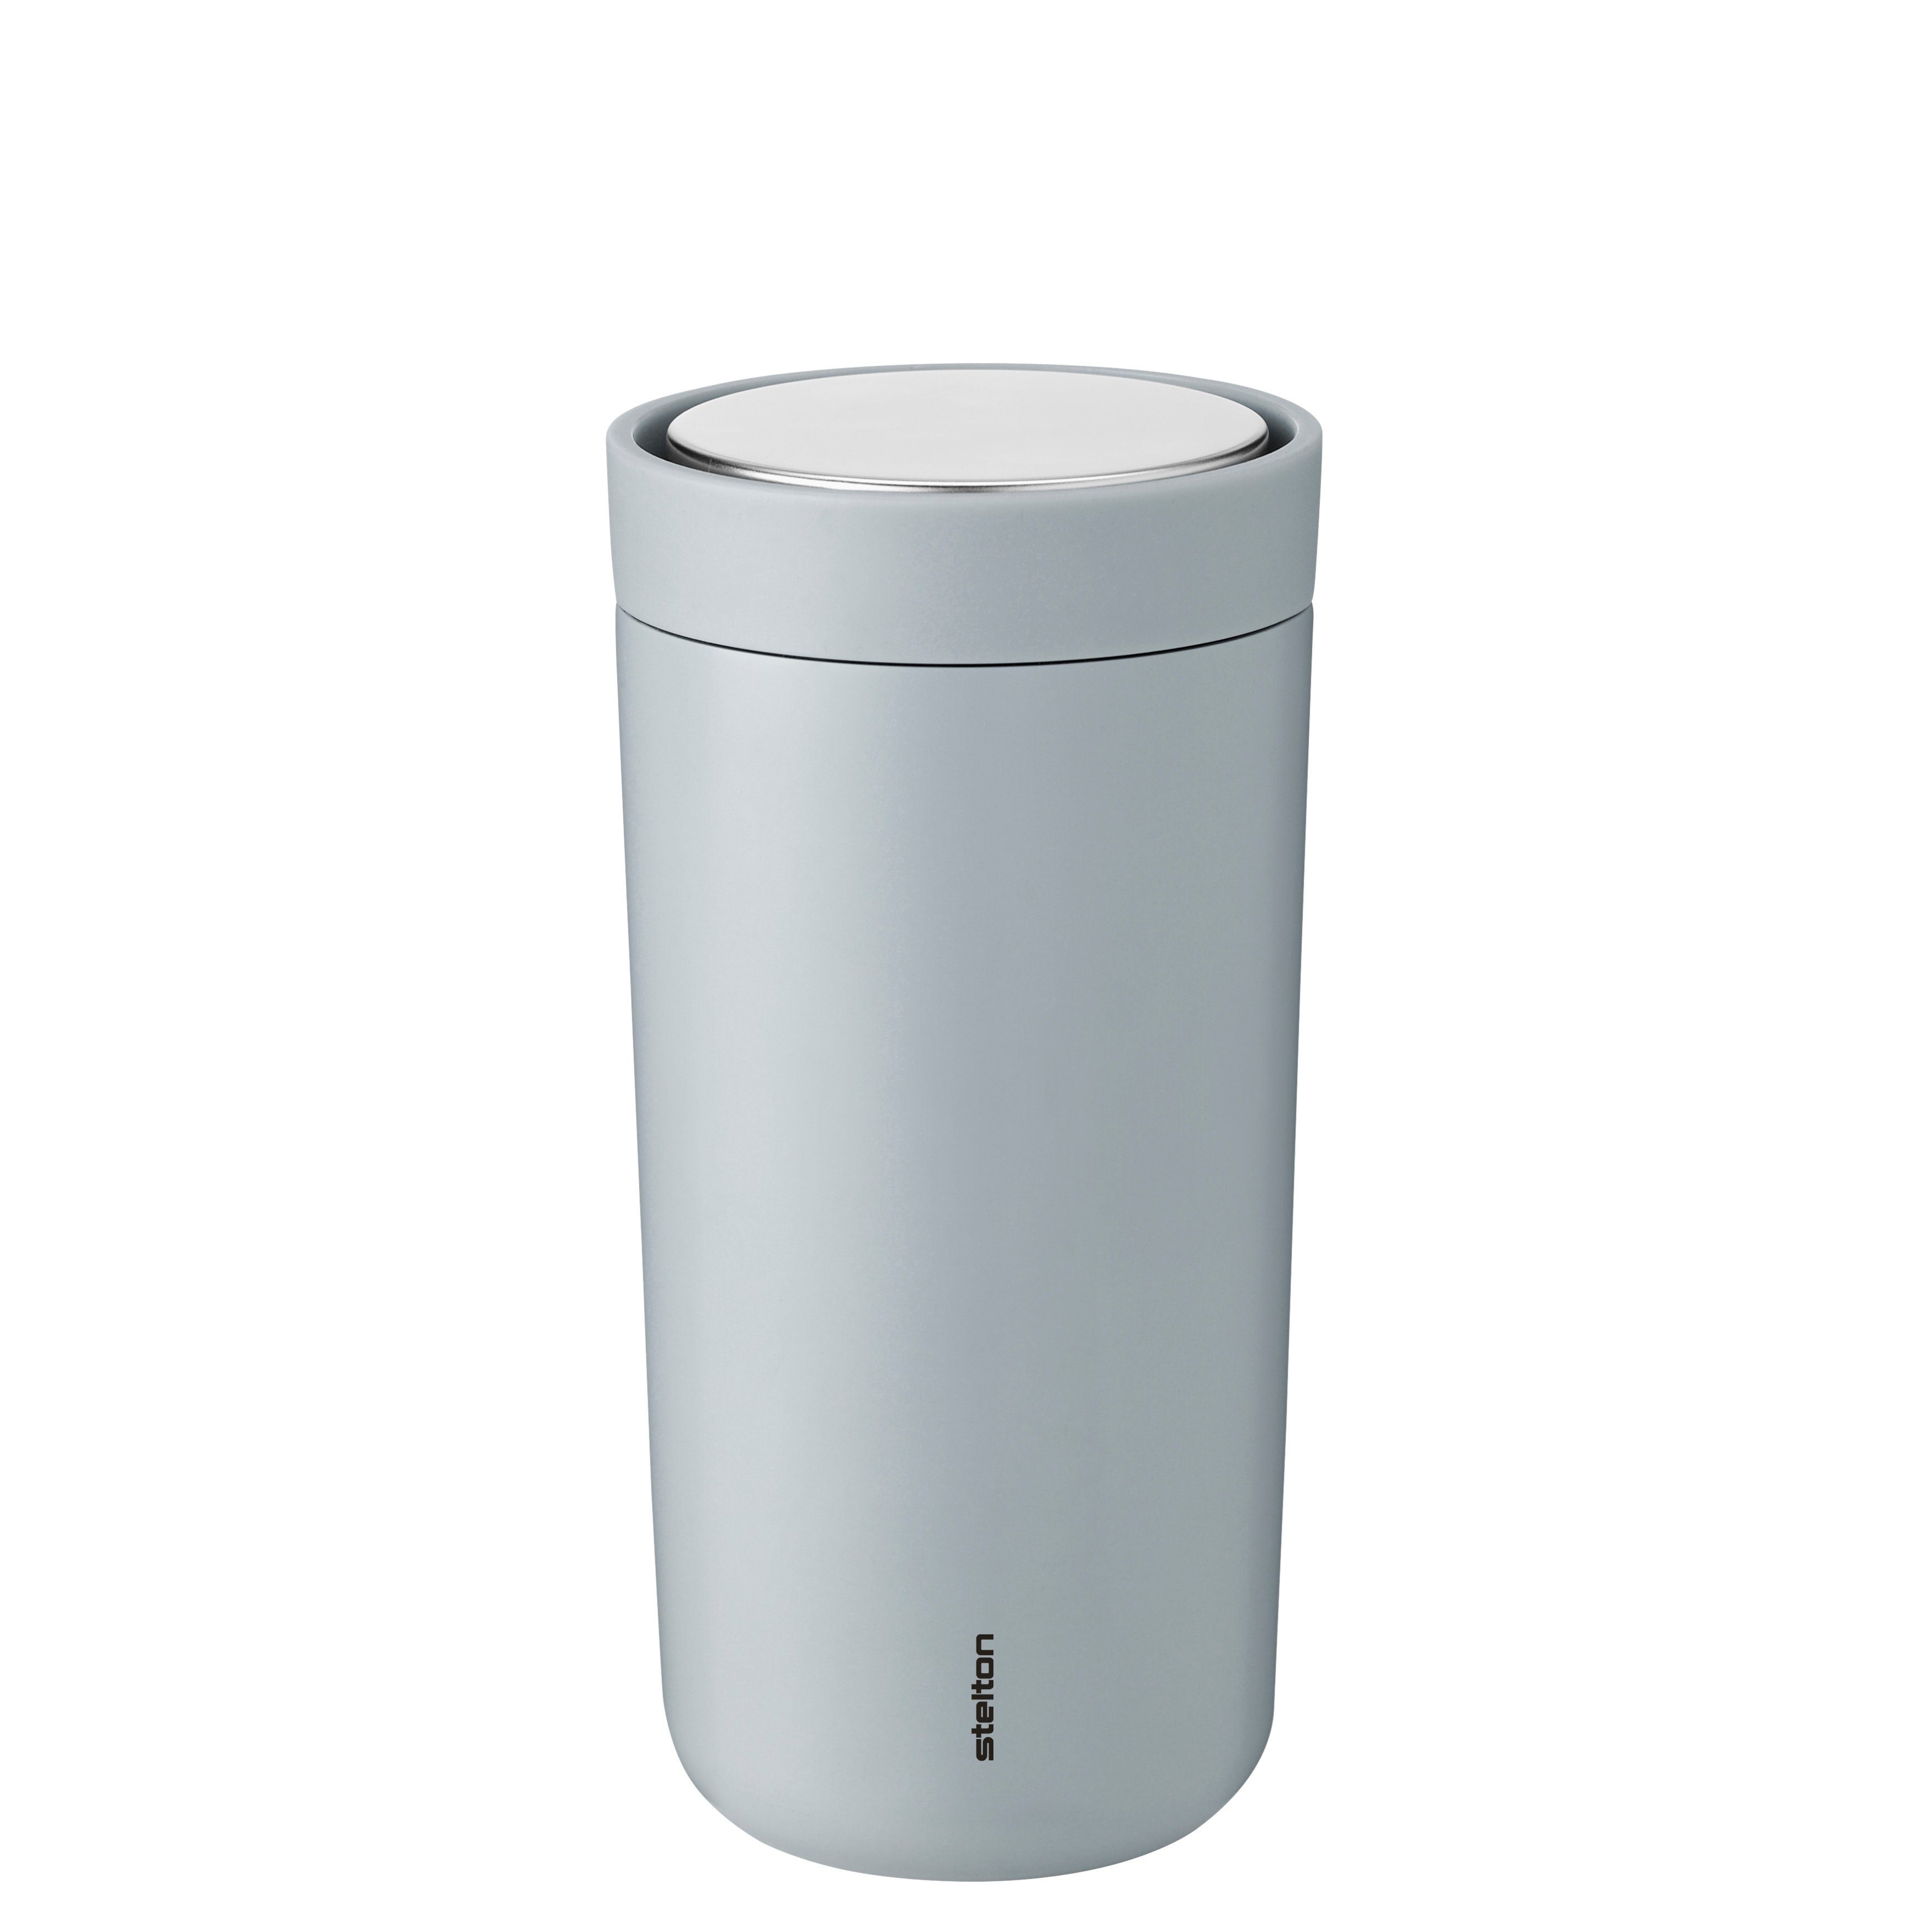 Stelton Thermobecher cloud Click Edelstahl Stelton Soft Thermobecher, To Go